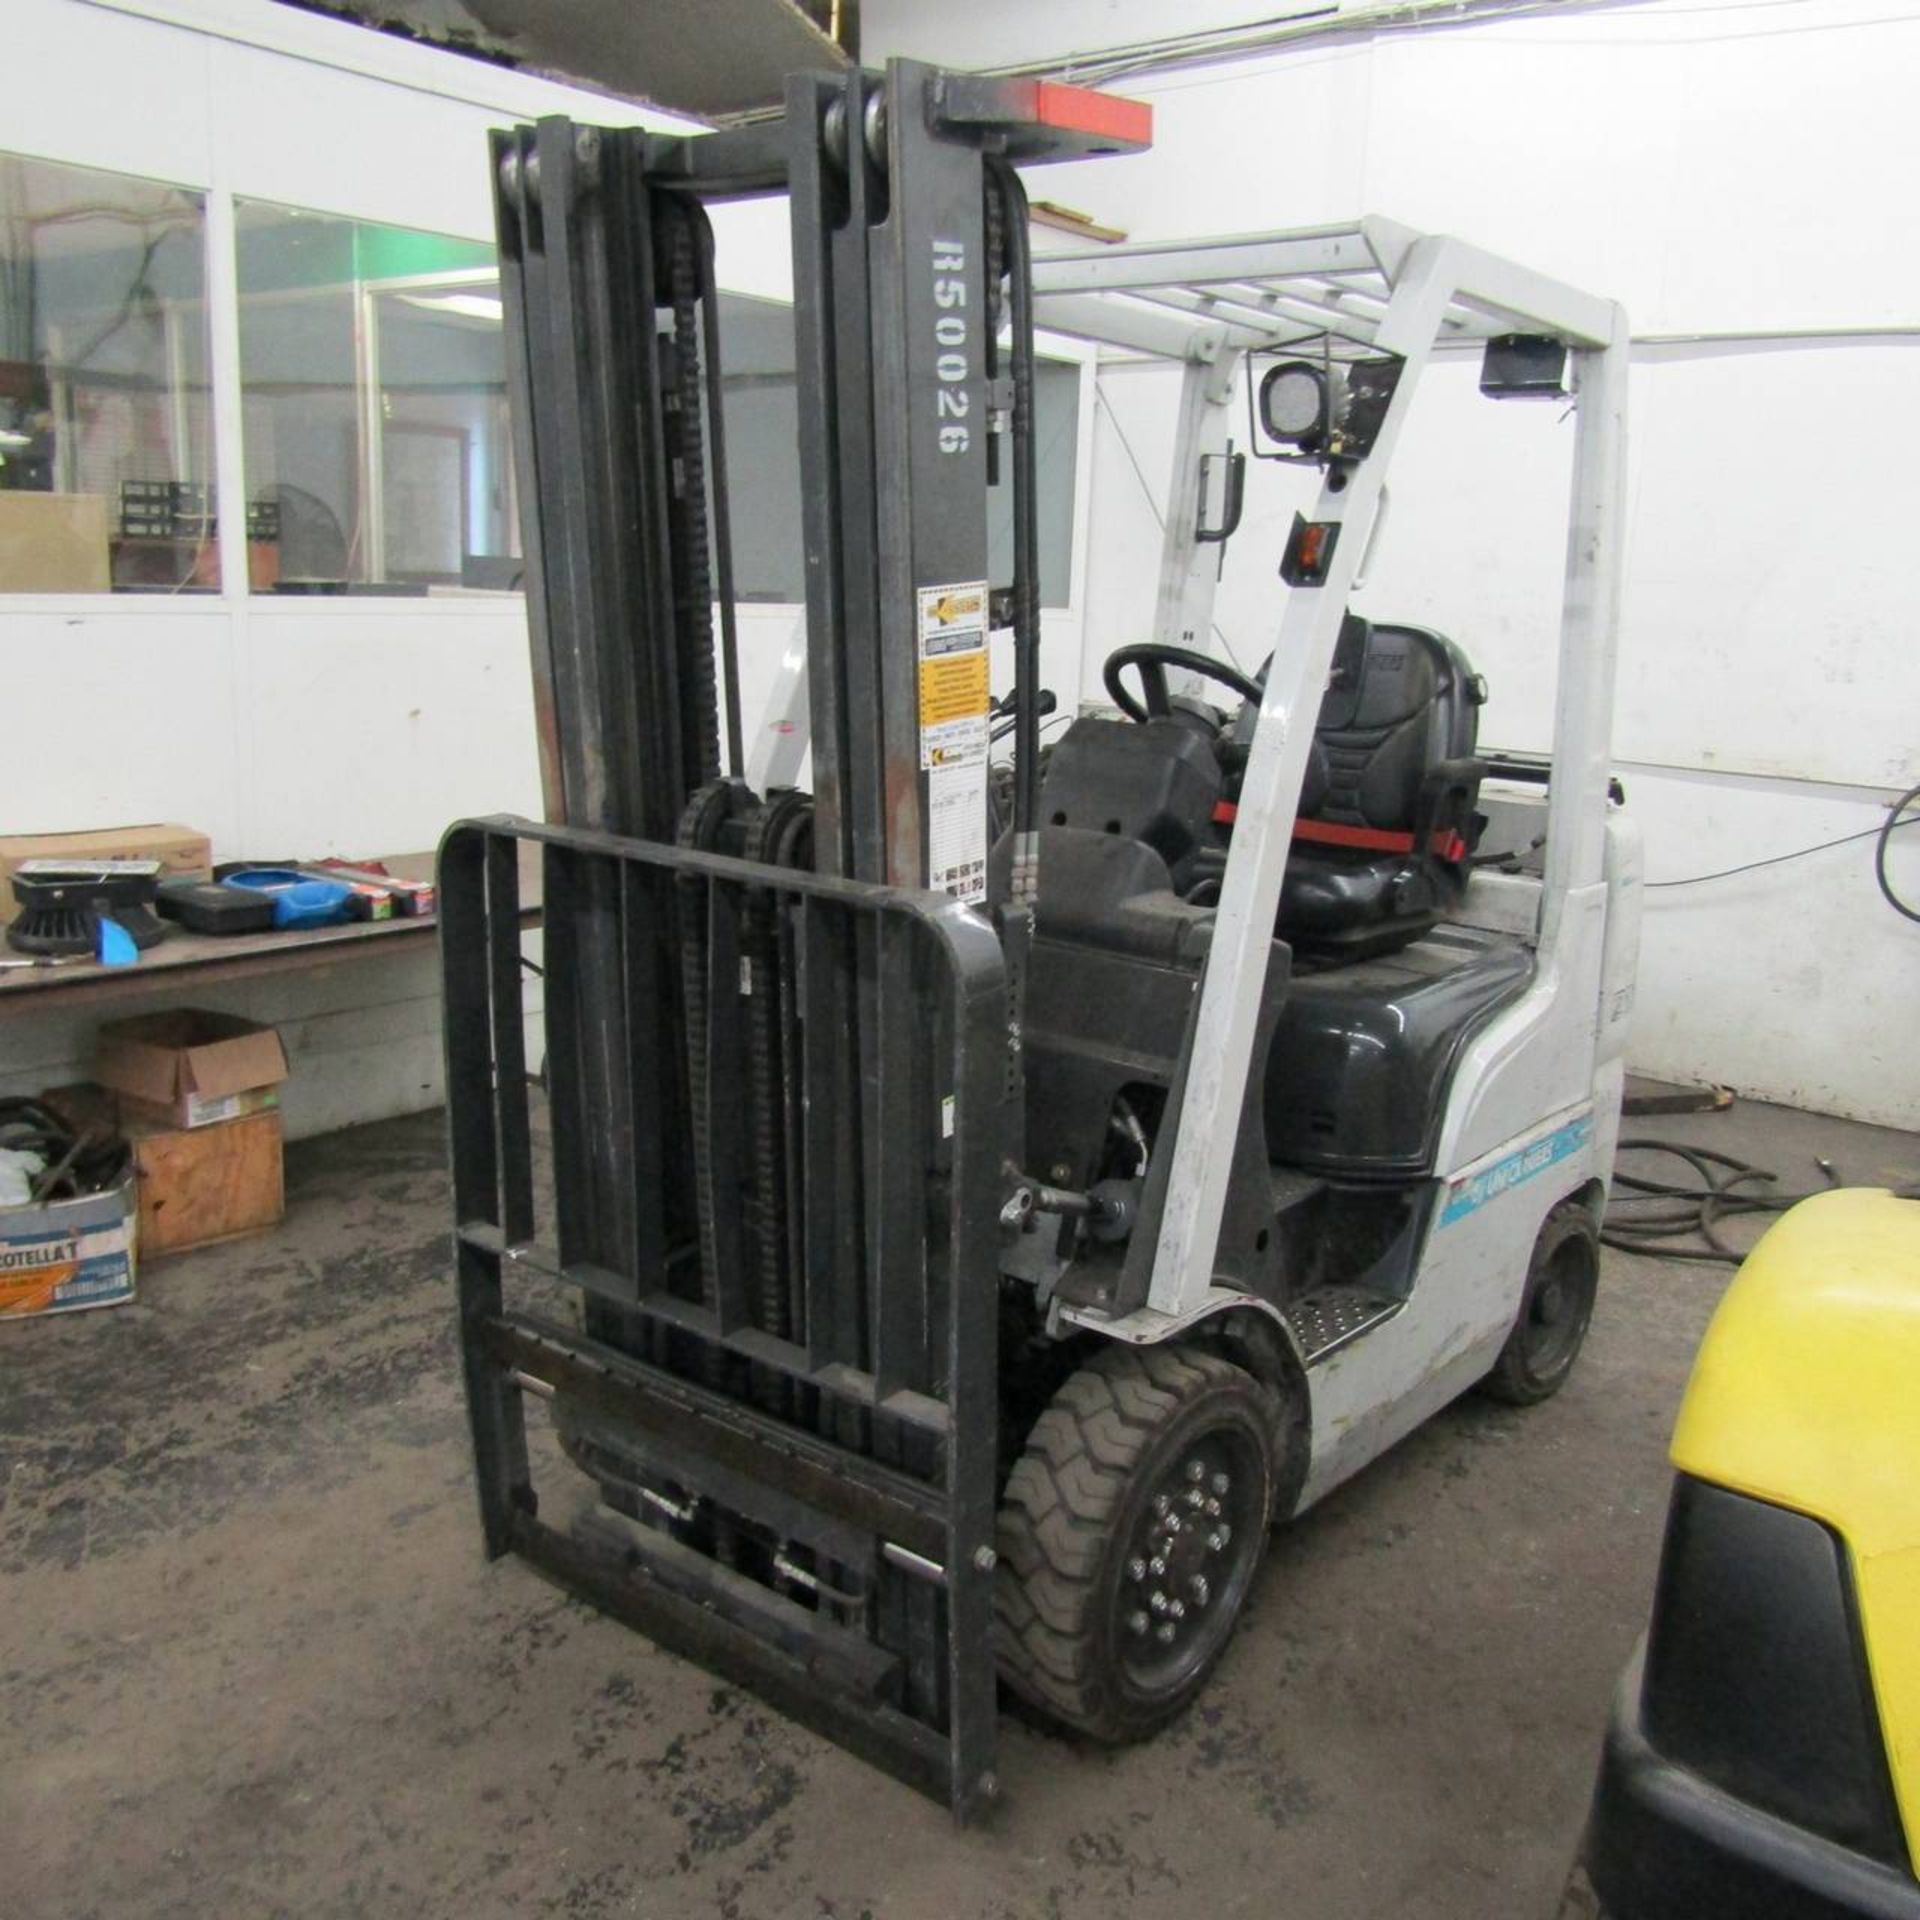 2014 Unicarriers FCG25L-A1 Propane Fork Lift - Image 2 of 7